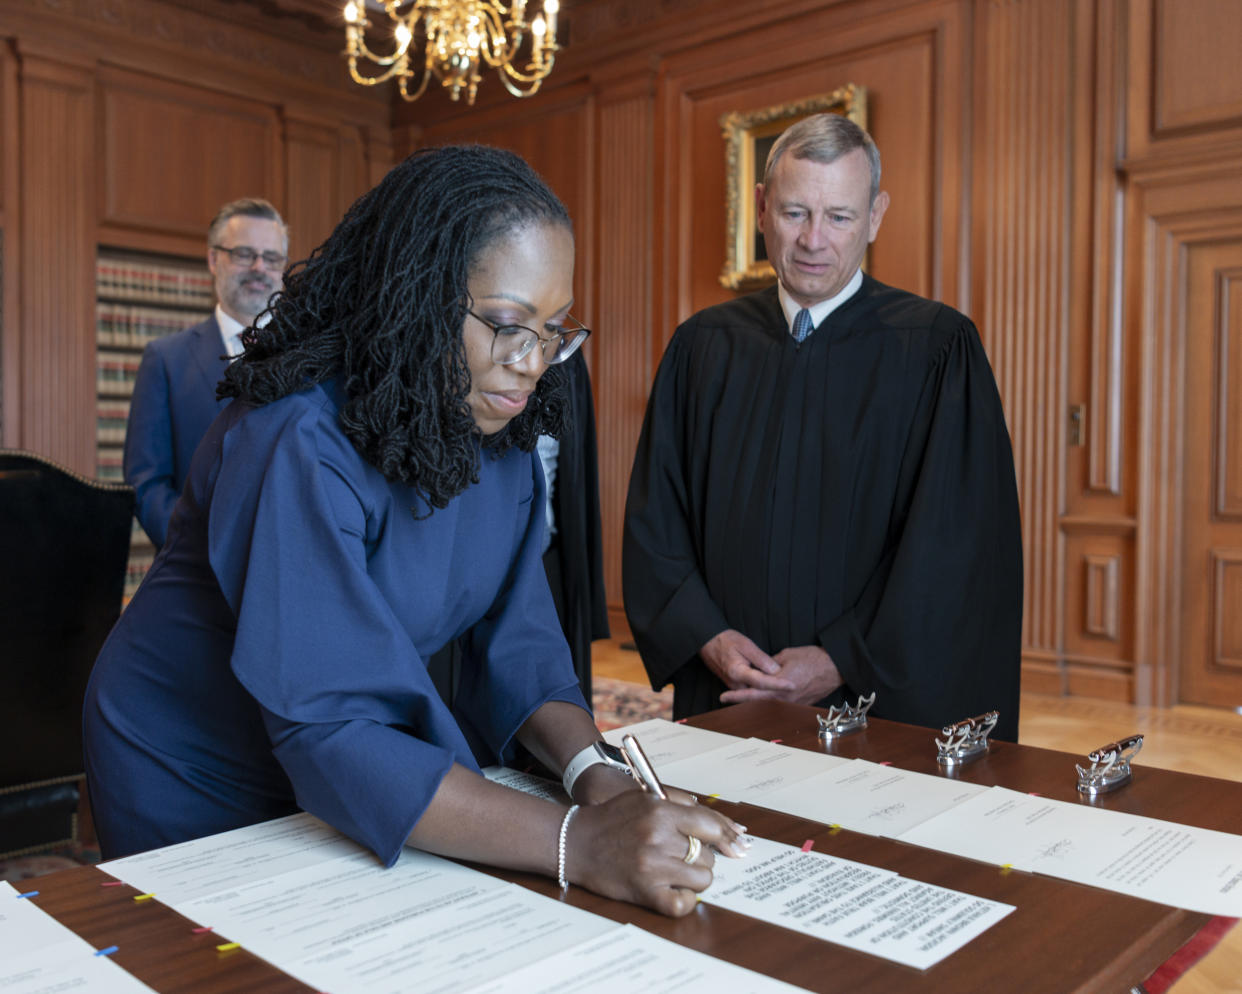 Signing the Oaths of Office (Fred Schilling / Collection of the Supreme Court of the United States)